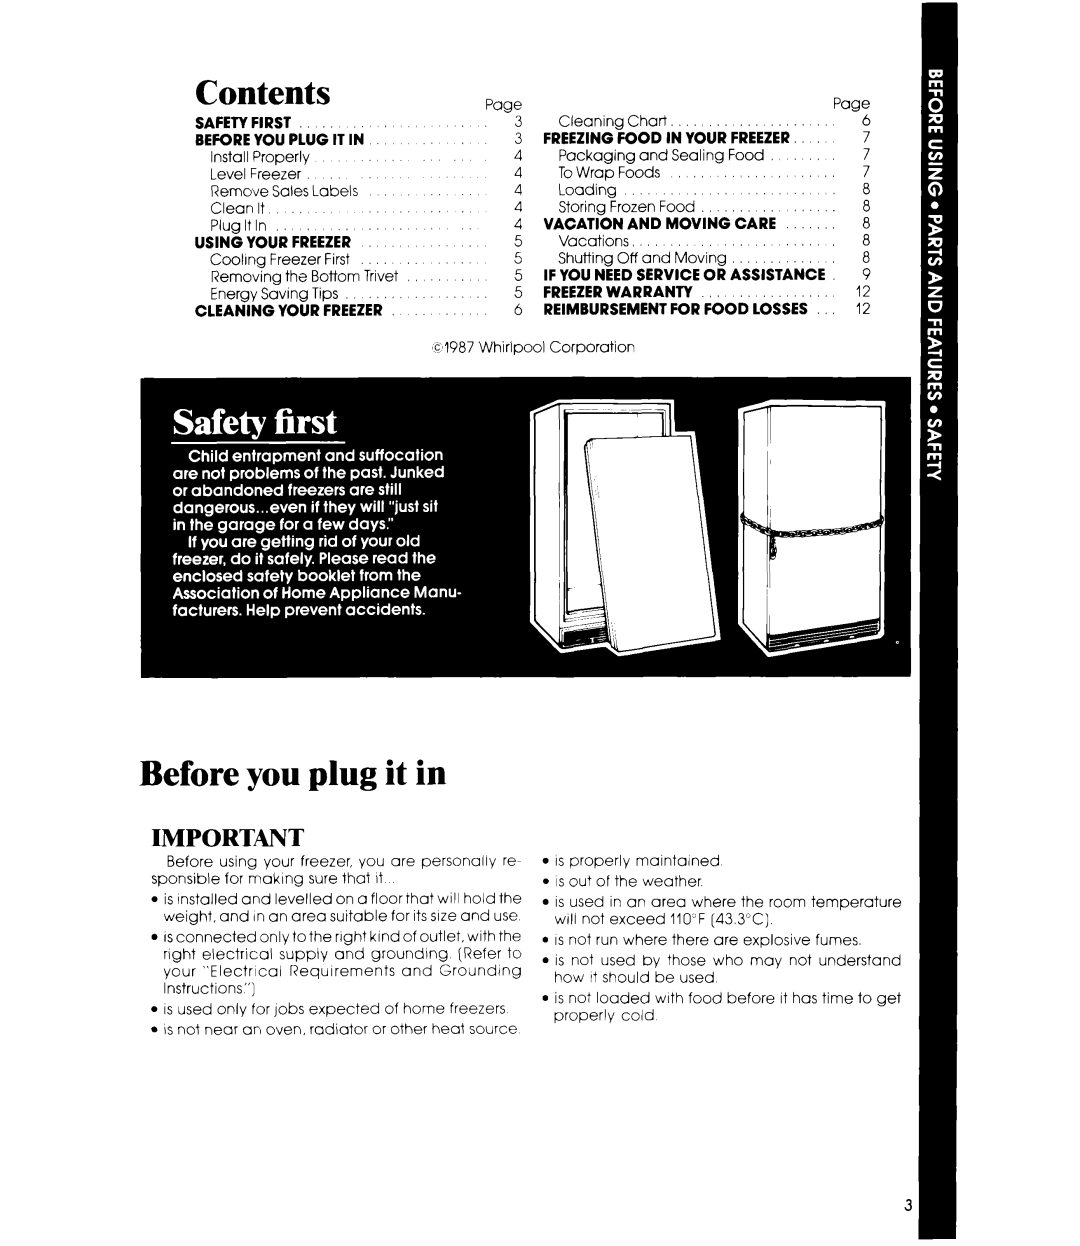 Whirlpool EV150L manual Contents, Before you plug it in 